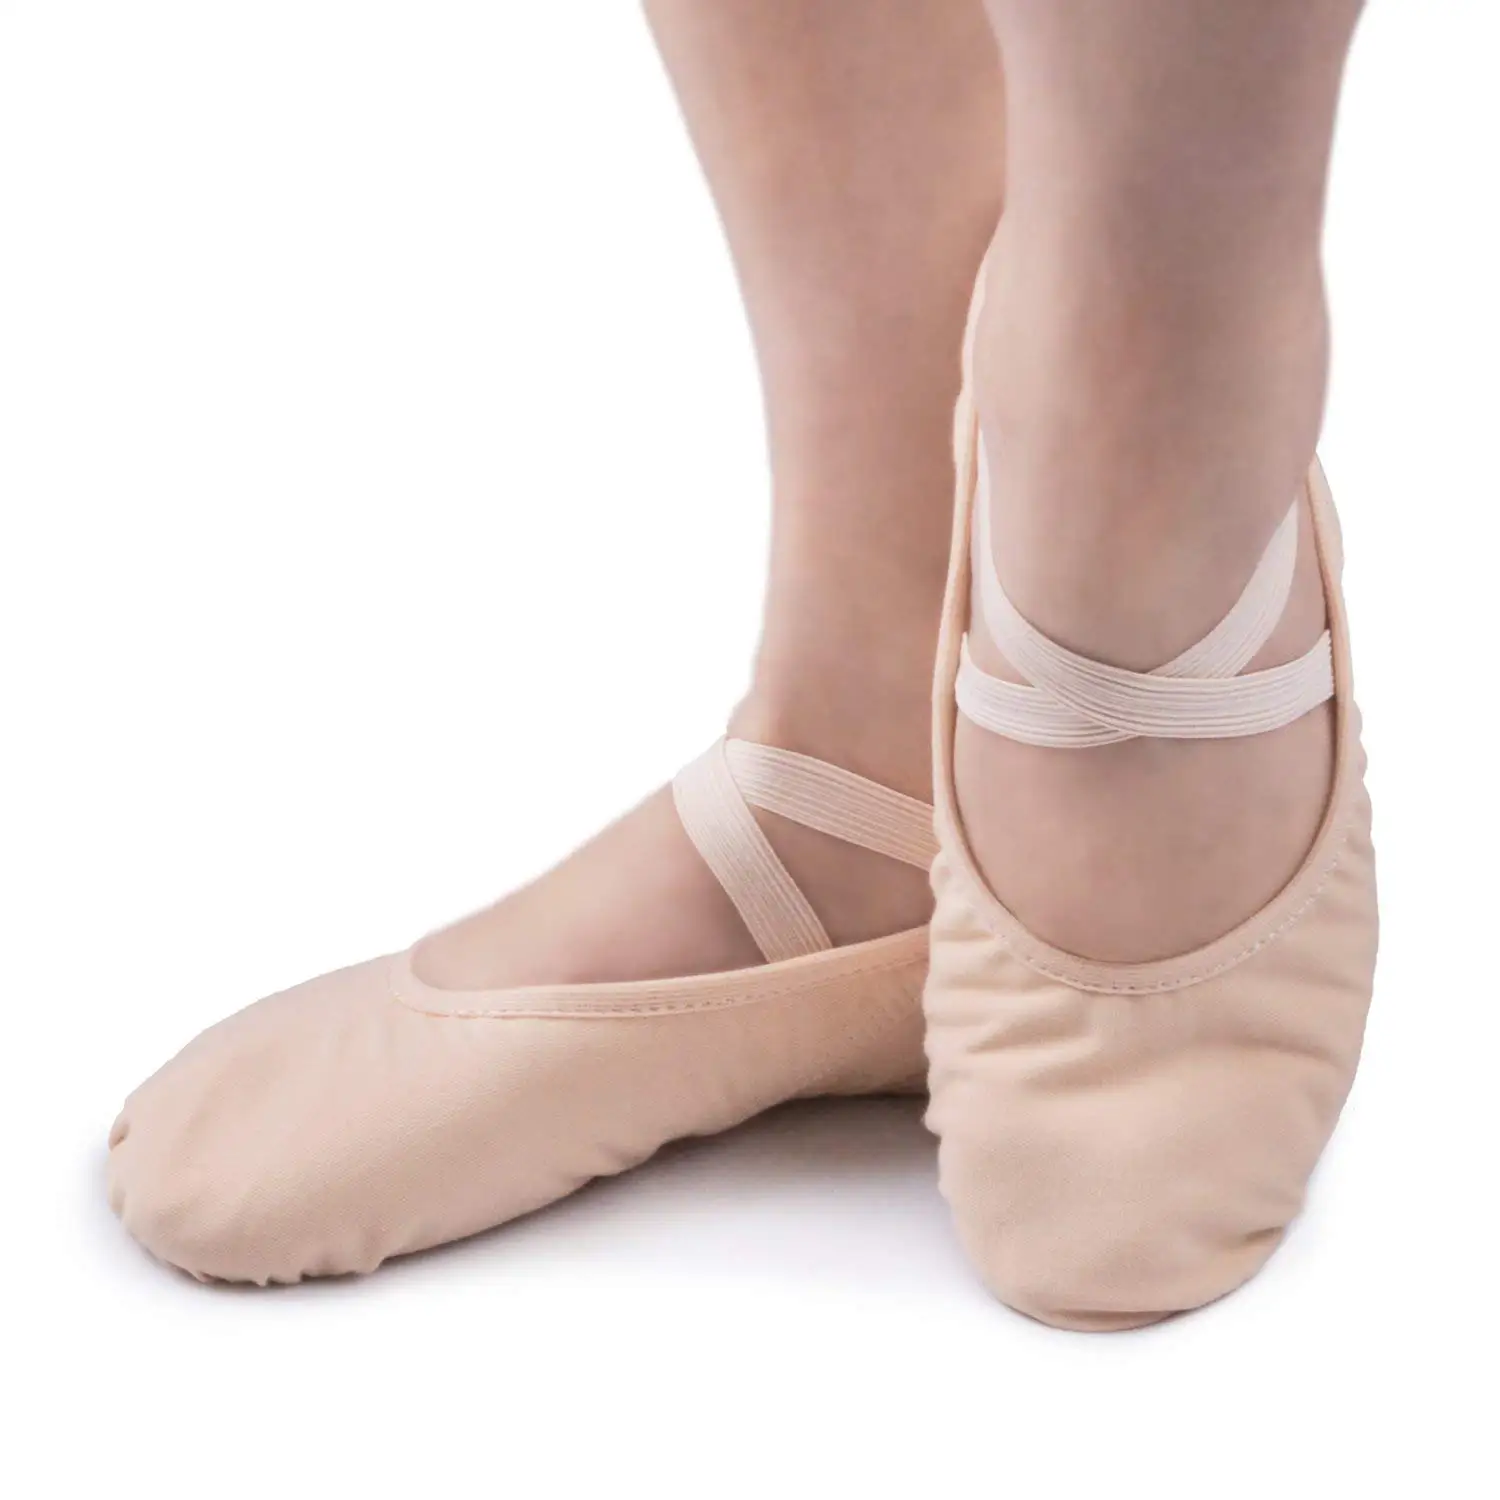 Pictures of ballet slippers